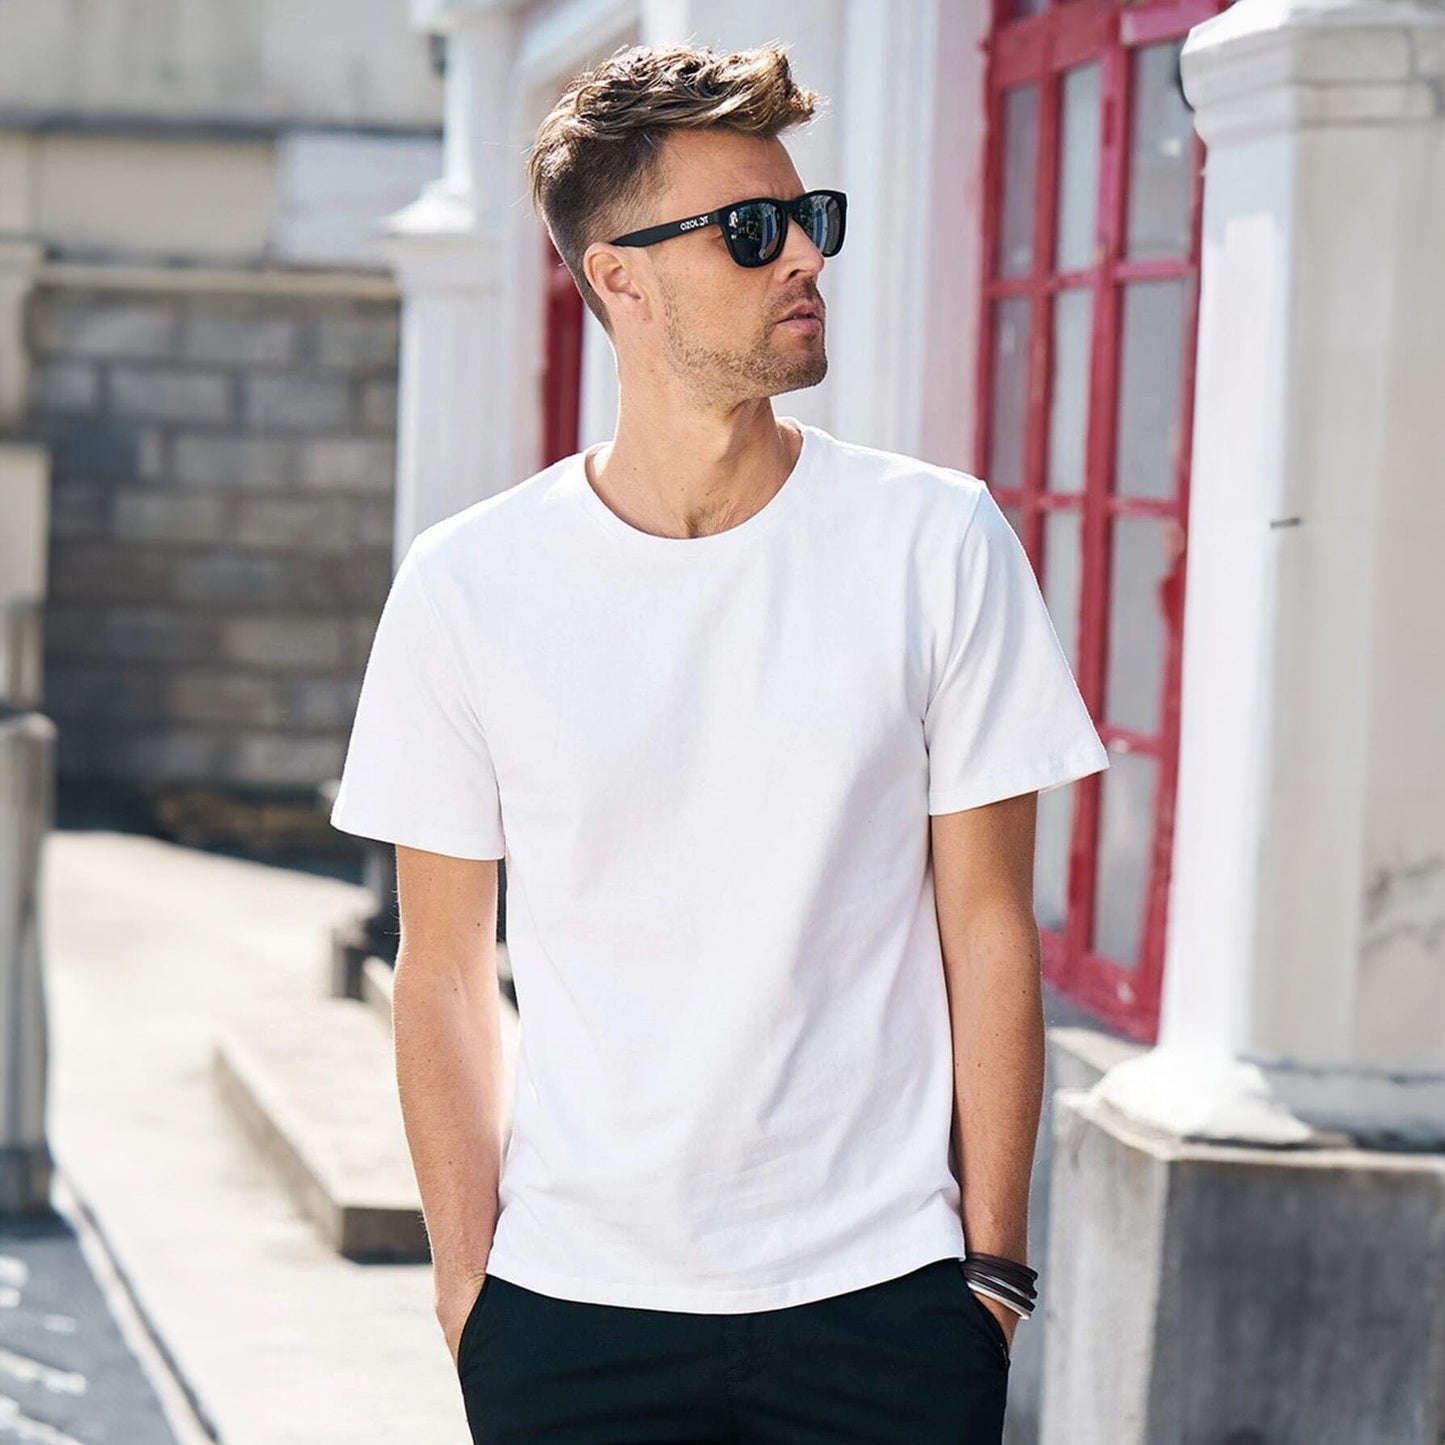 Lower East Men's Short-Sleeve Tee - 100% BCI Combed Cotton Perfection Men's Tee Shirt Image White S 